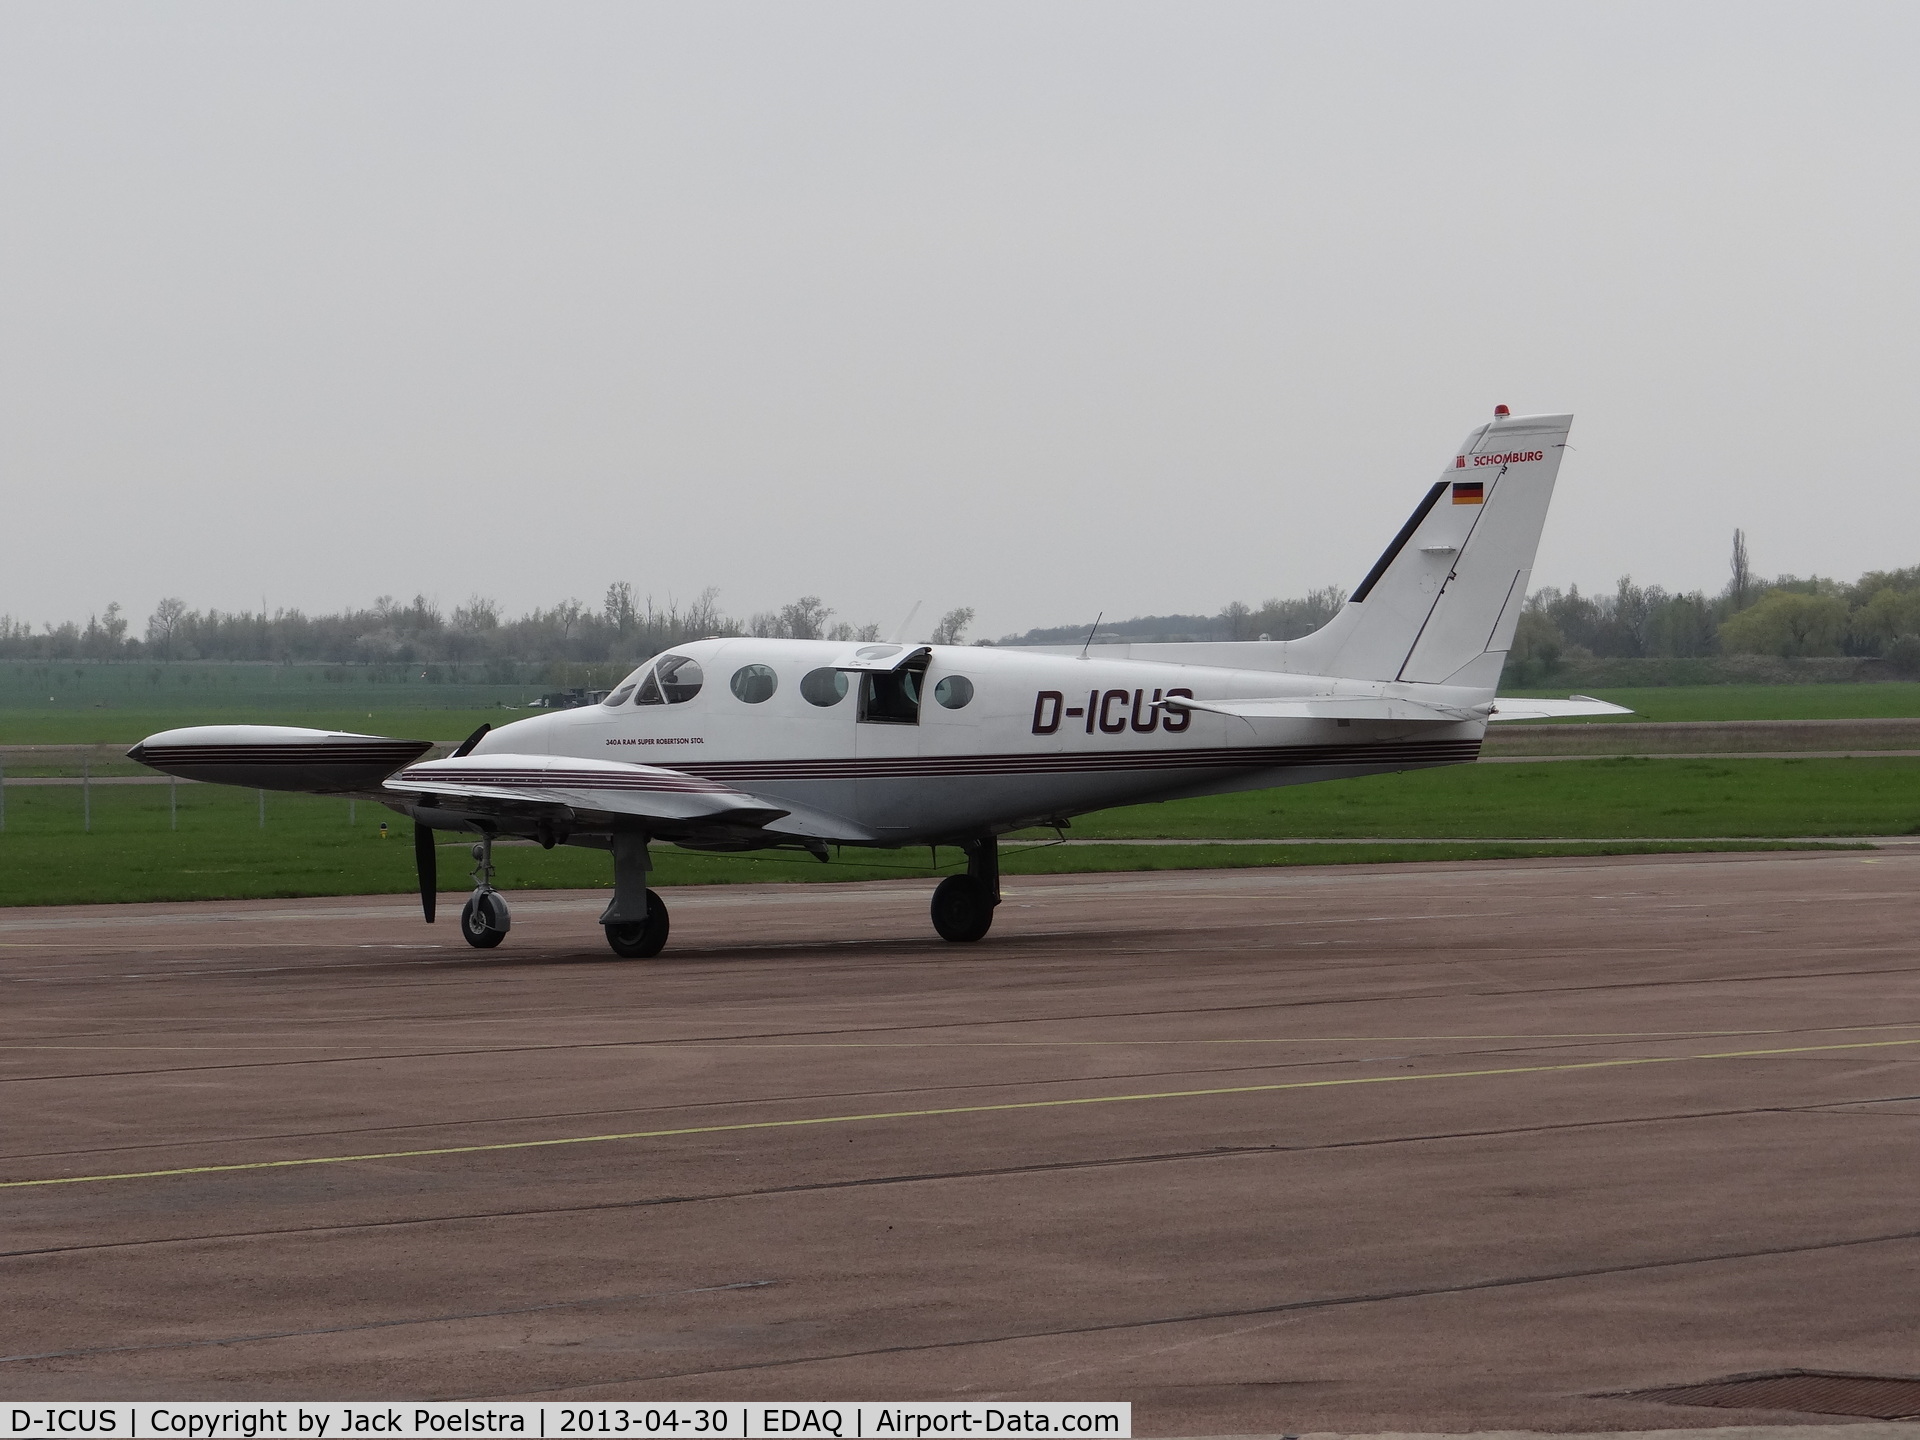 D-ICUS, Cessna 340A C/N 340A1012, D-ICUS at Halle airport